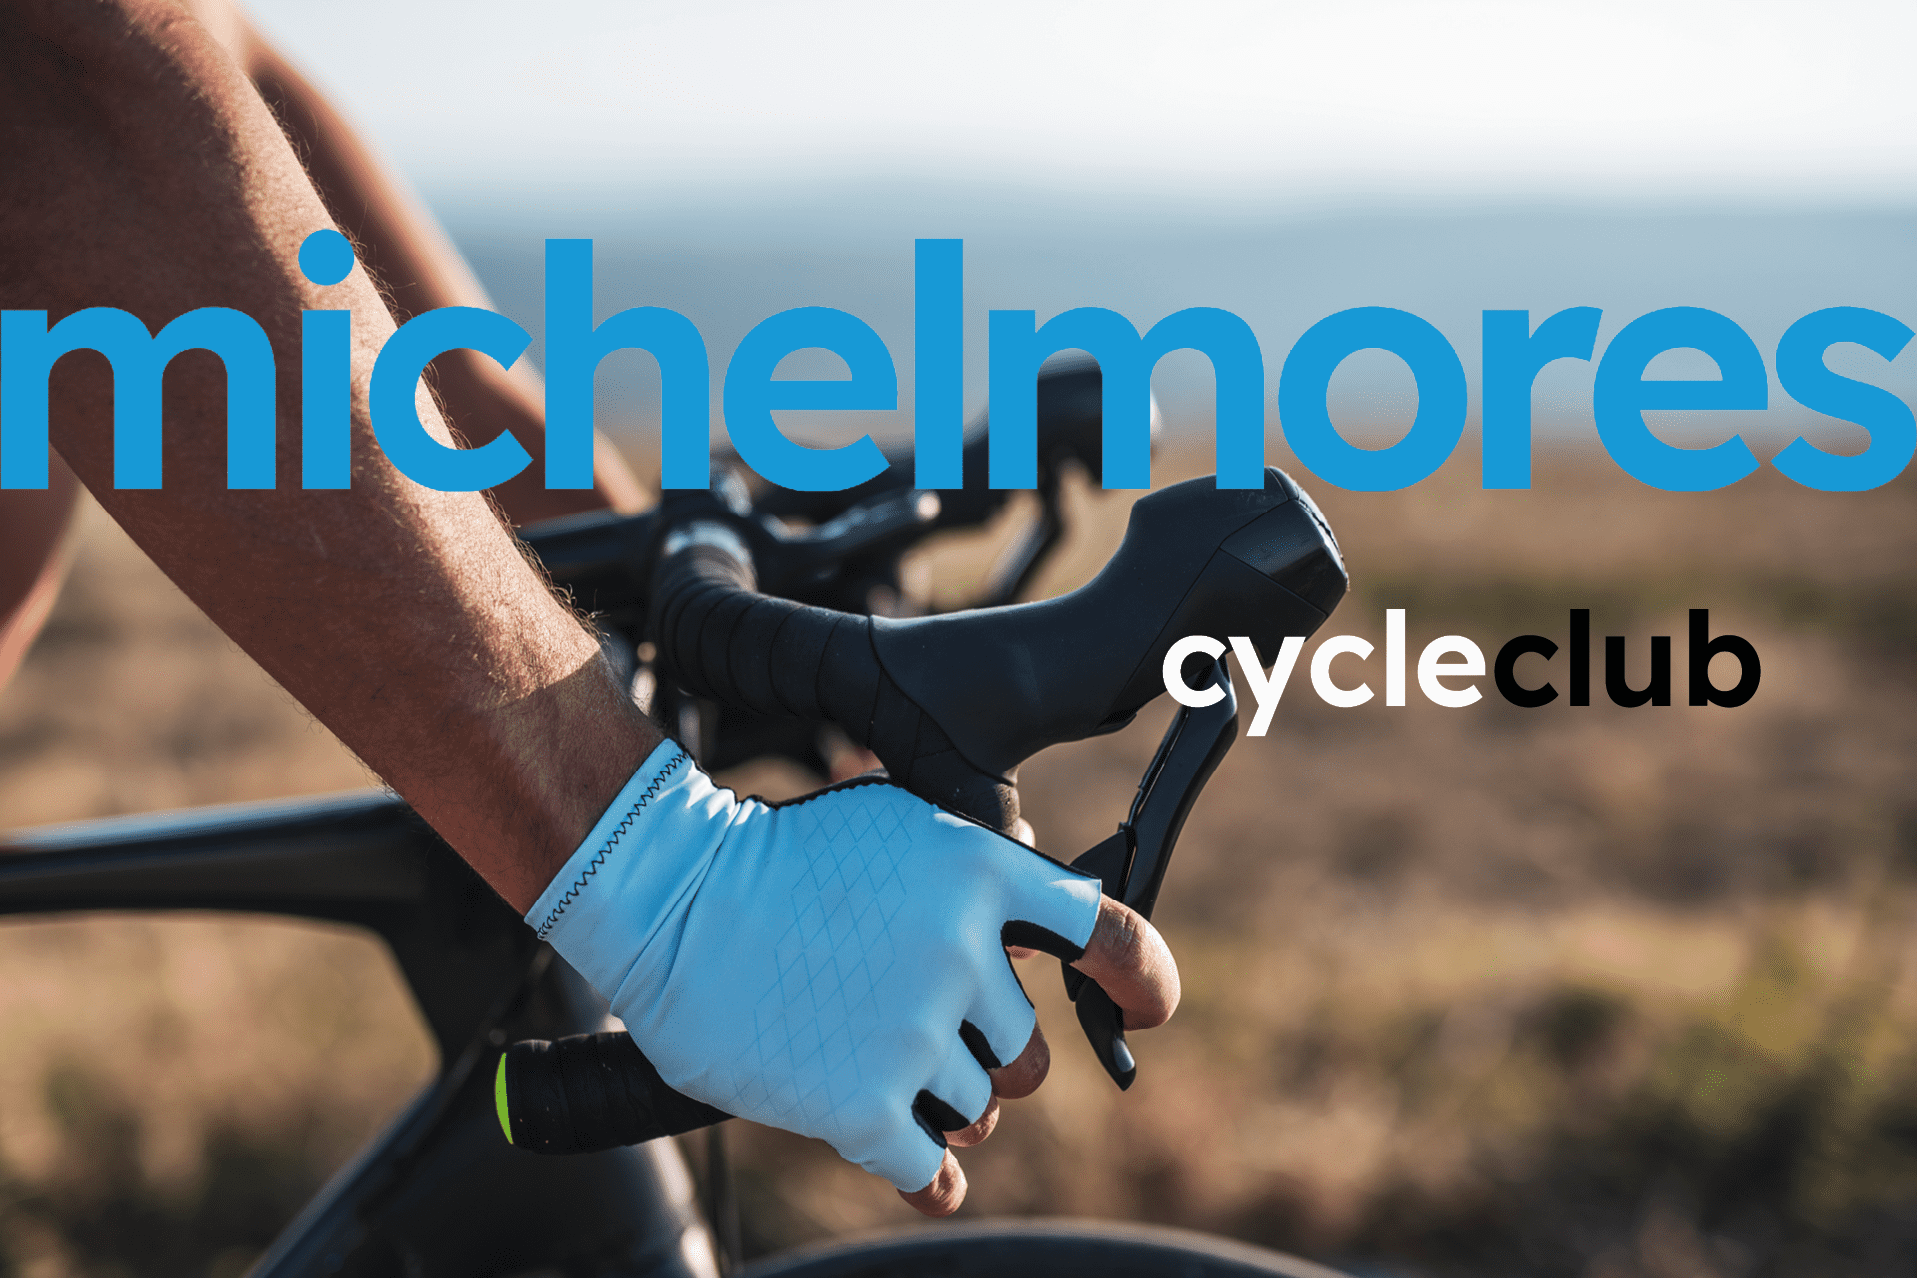 Michelmores Cycle Club